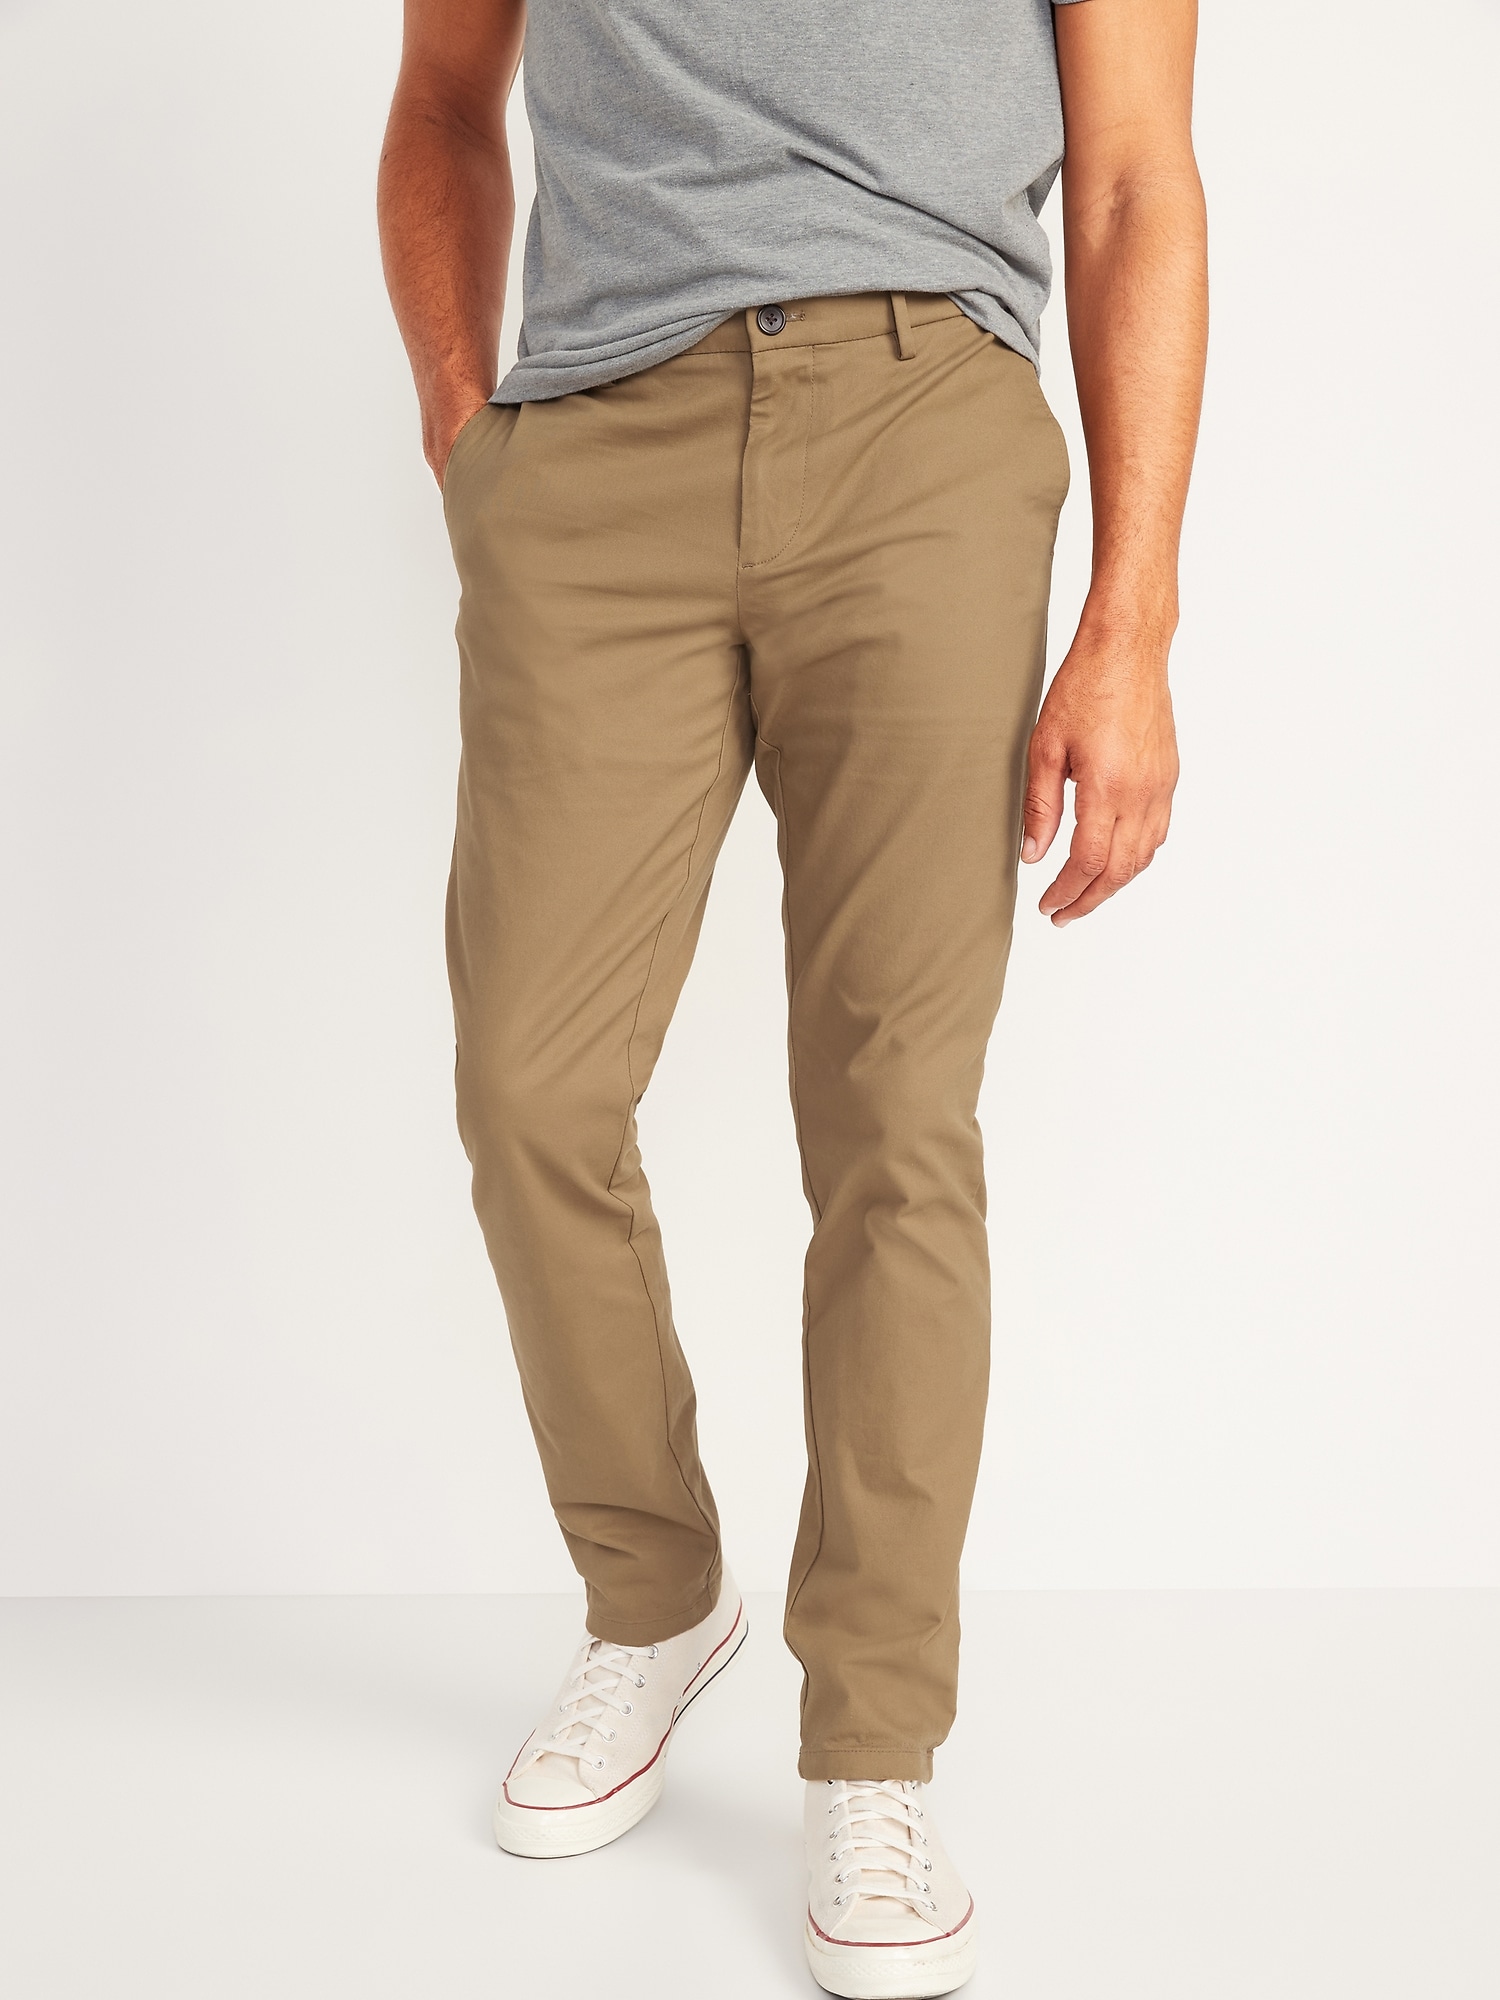 Classic Loose-Fit Khakis for Men, Old Navy